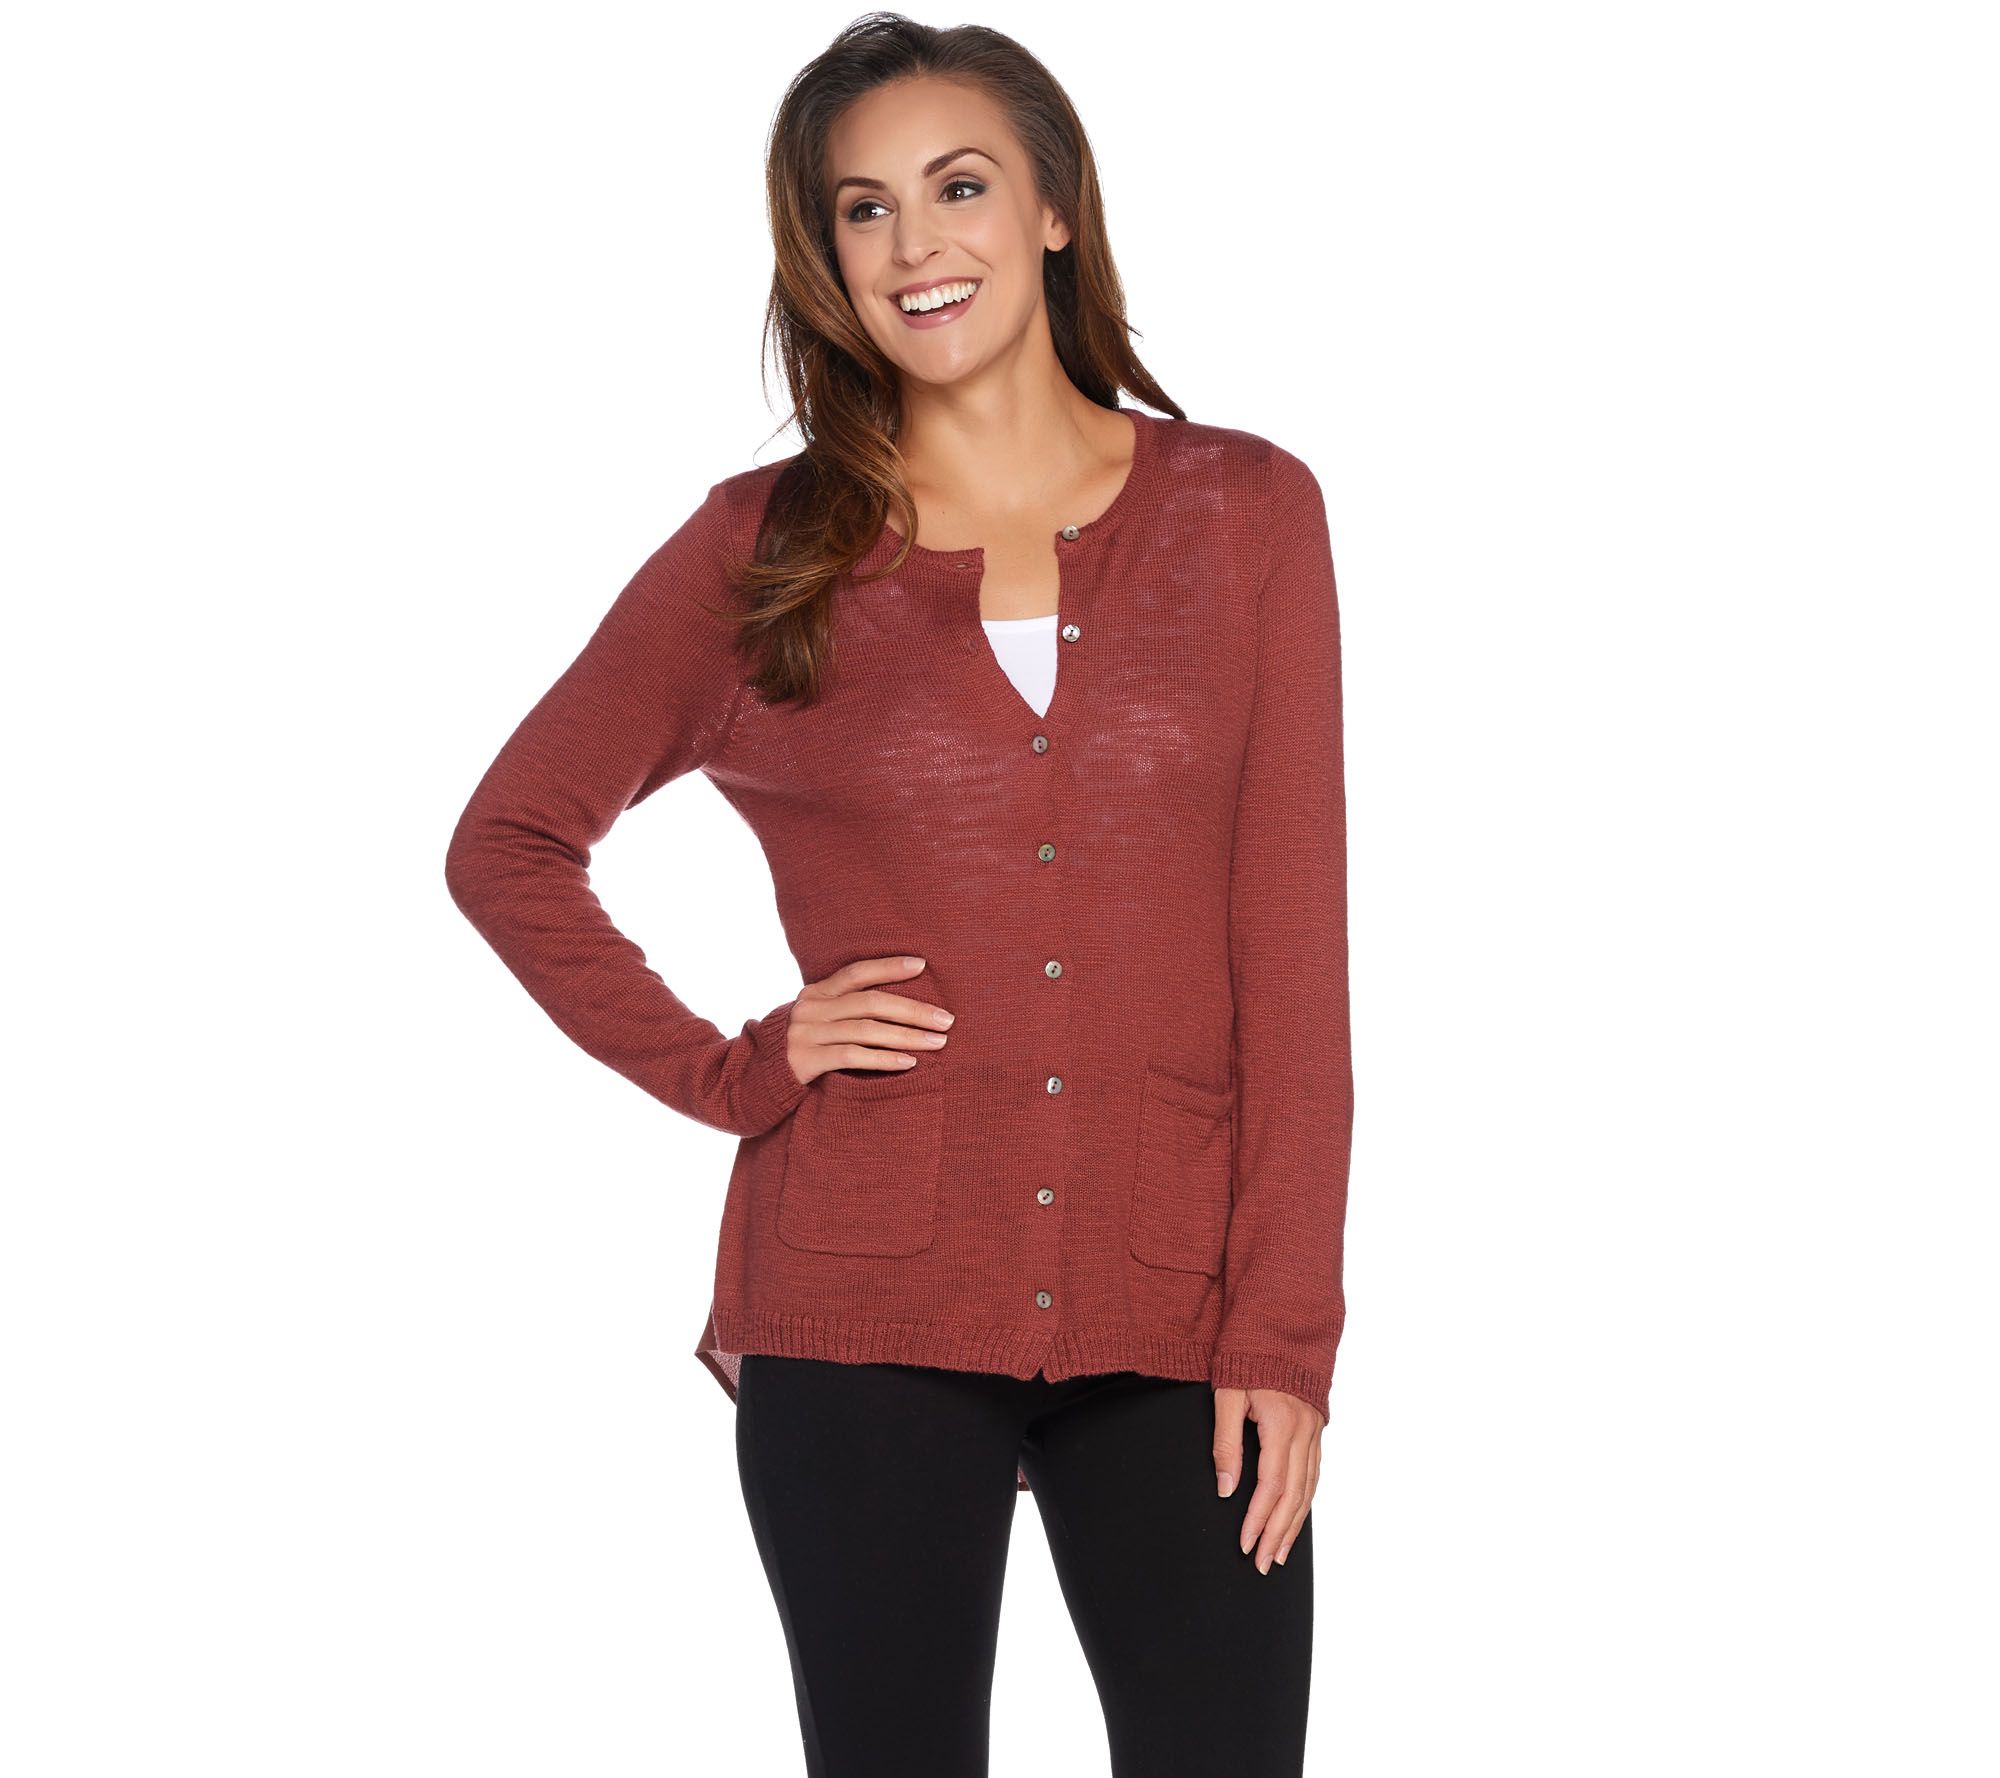 LOGO by Lori Goldstein Sweater Cardigan with Woven Panels - QVC.com